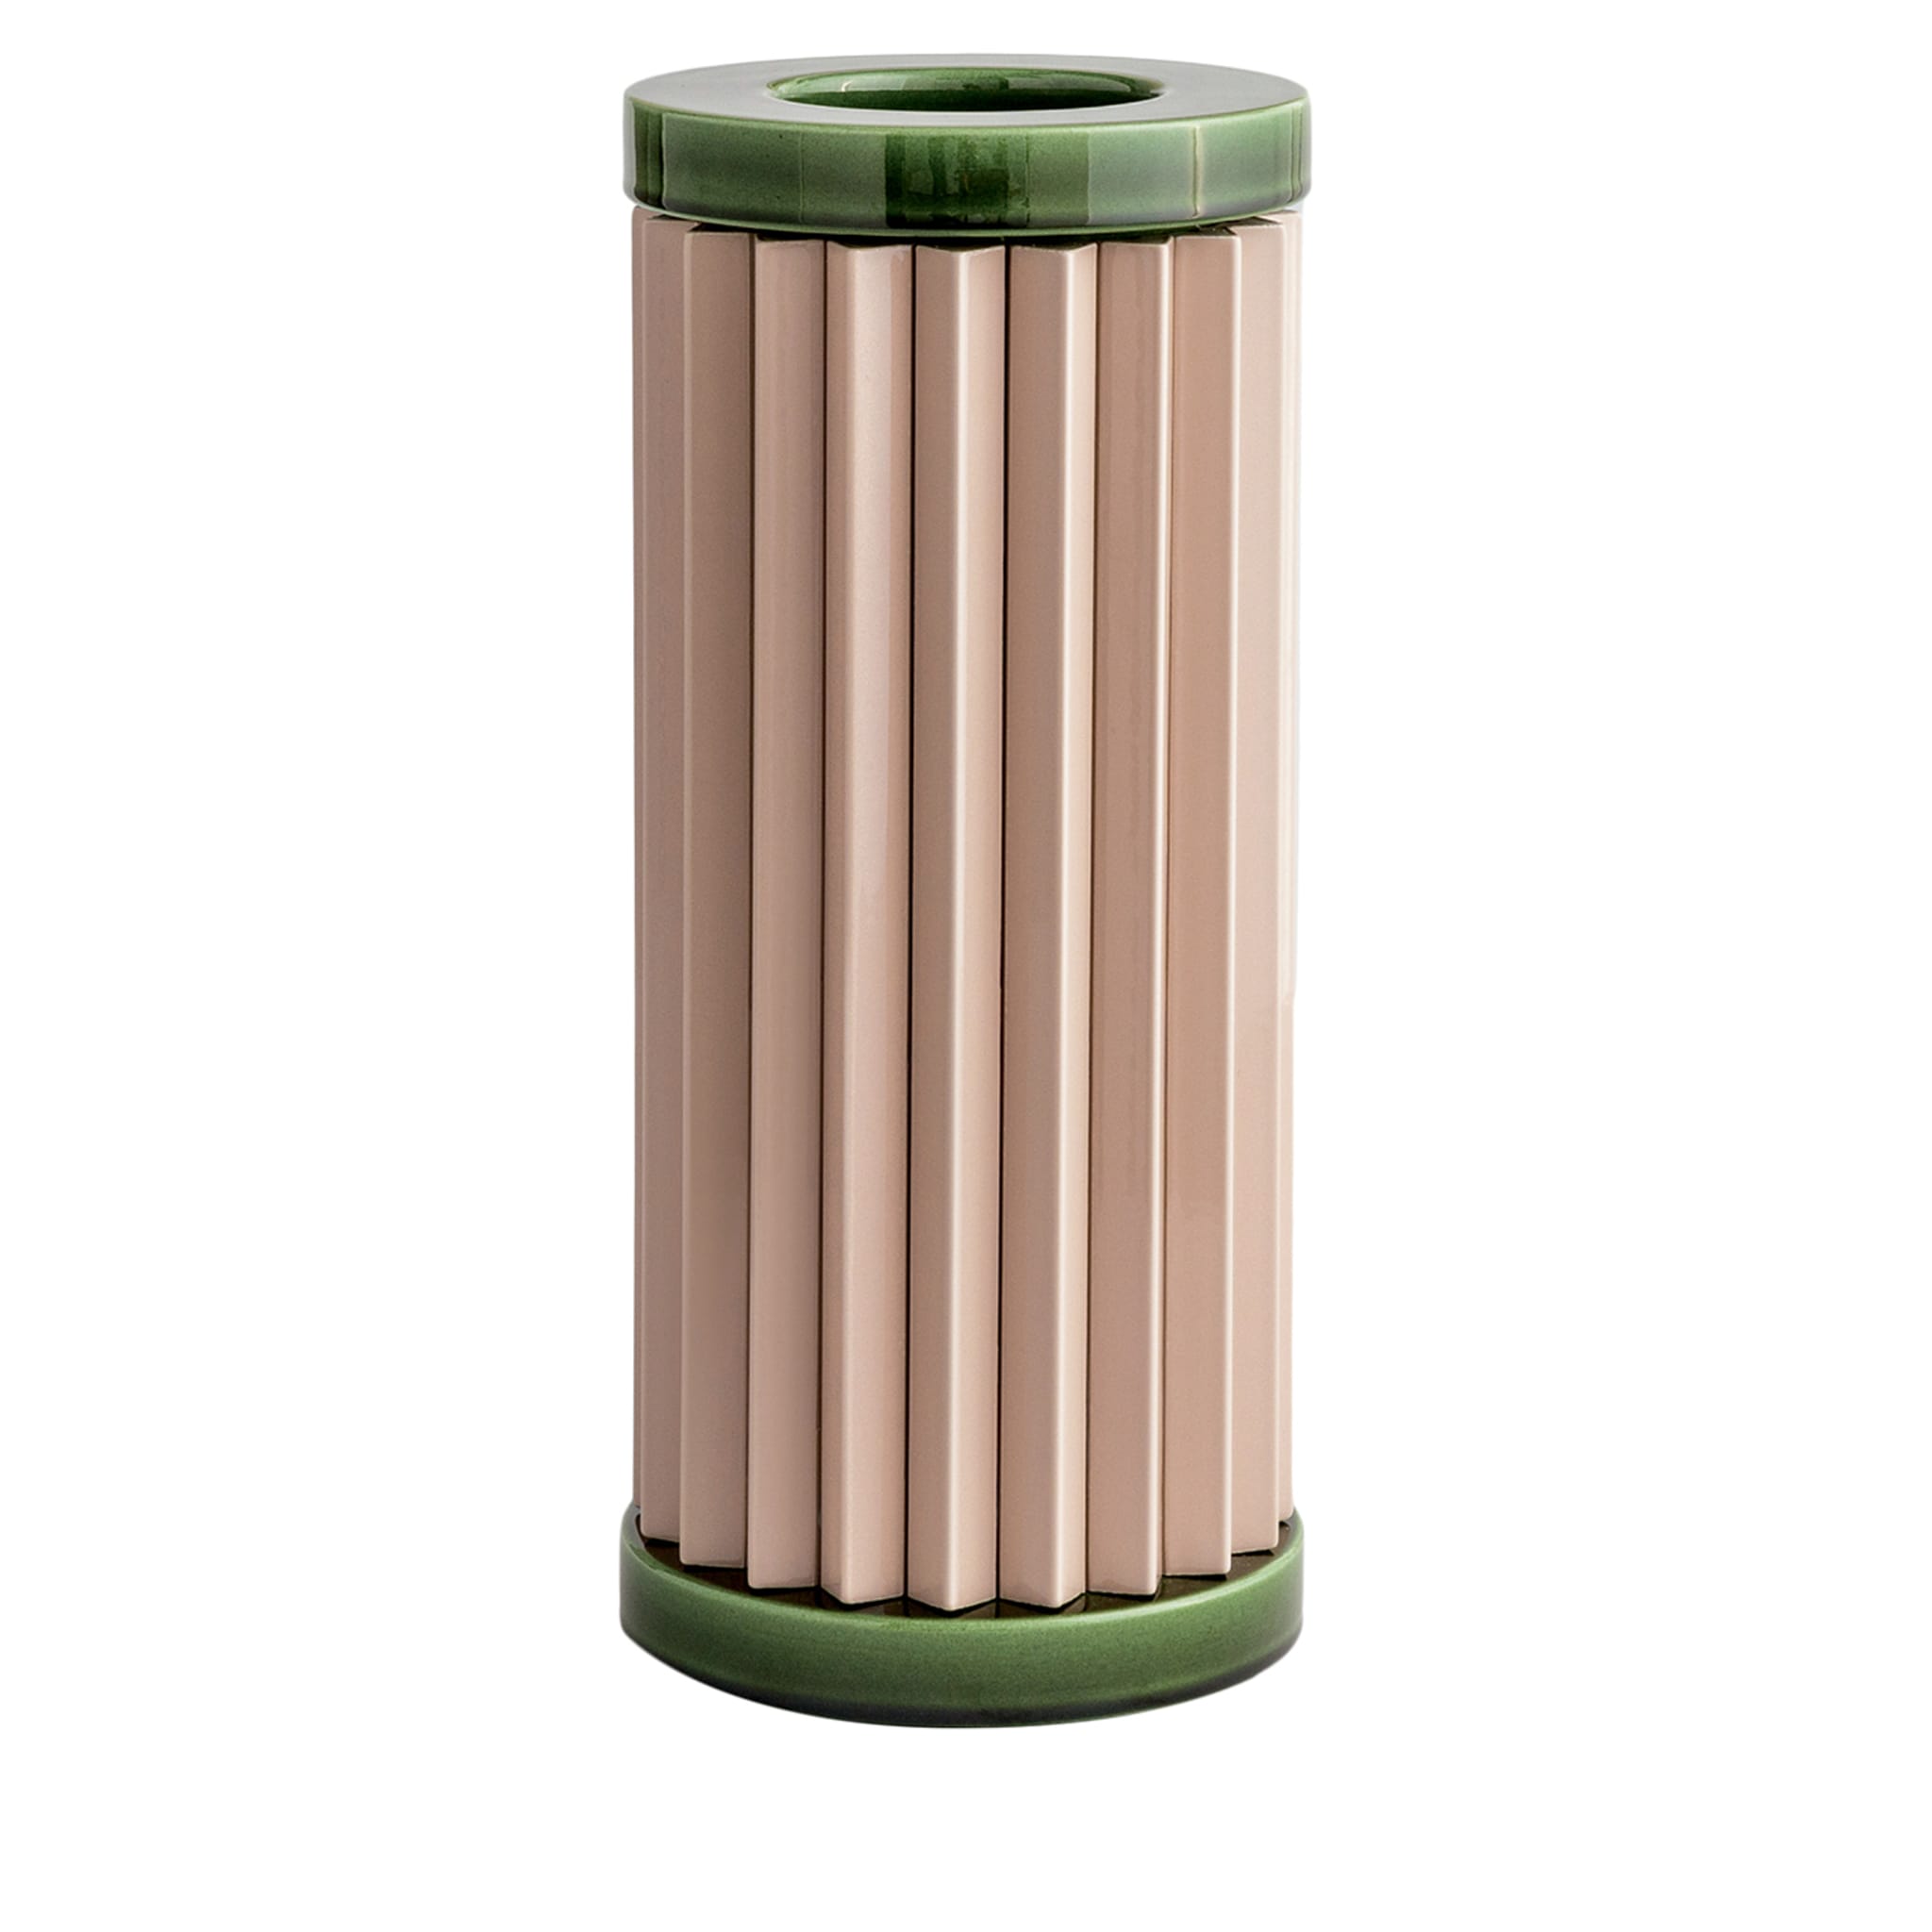 Rombini A Green and Rose Vase by Ronan & Erwan Bouroullec - Main view